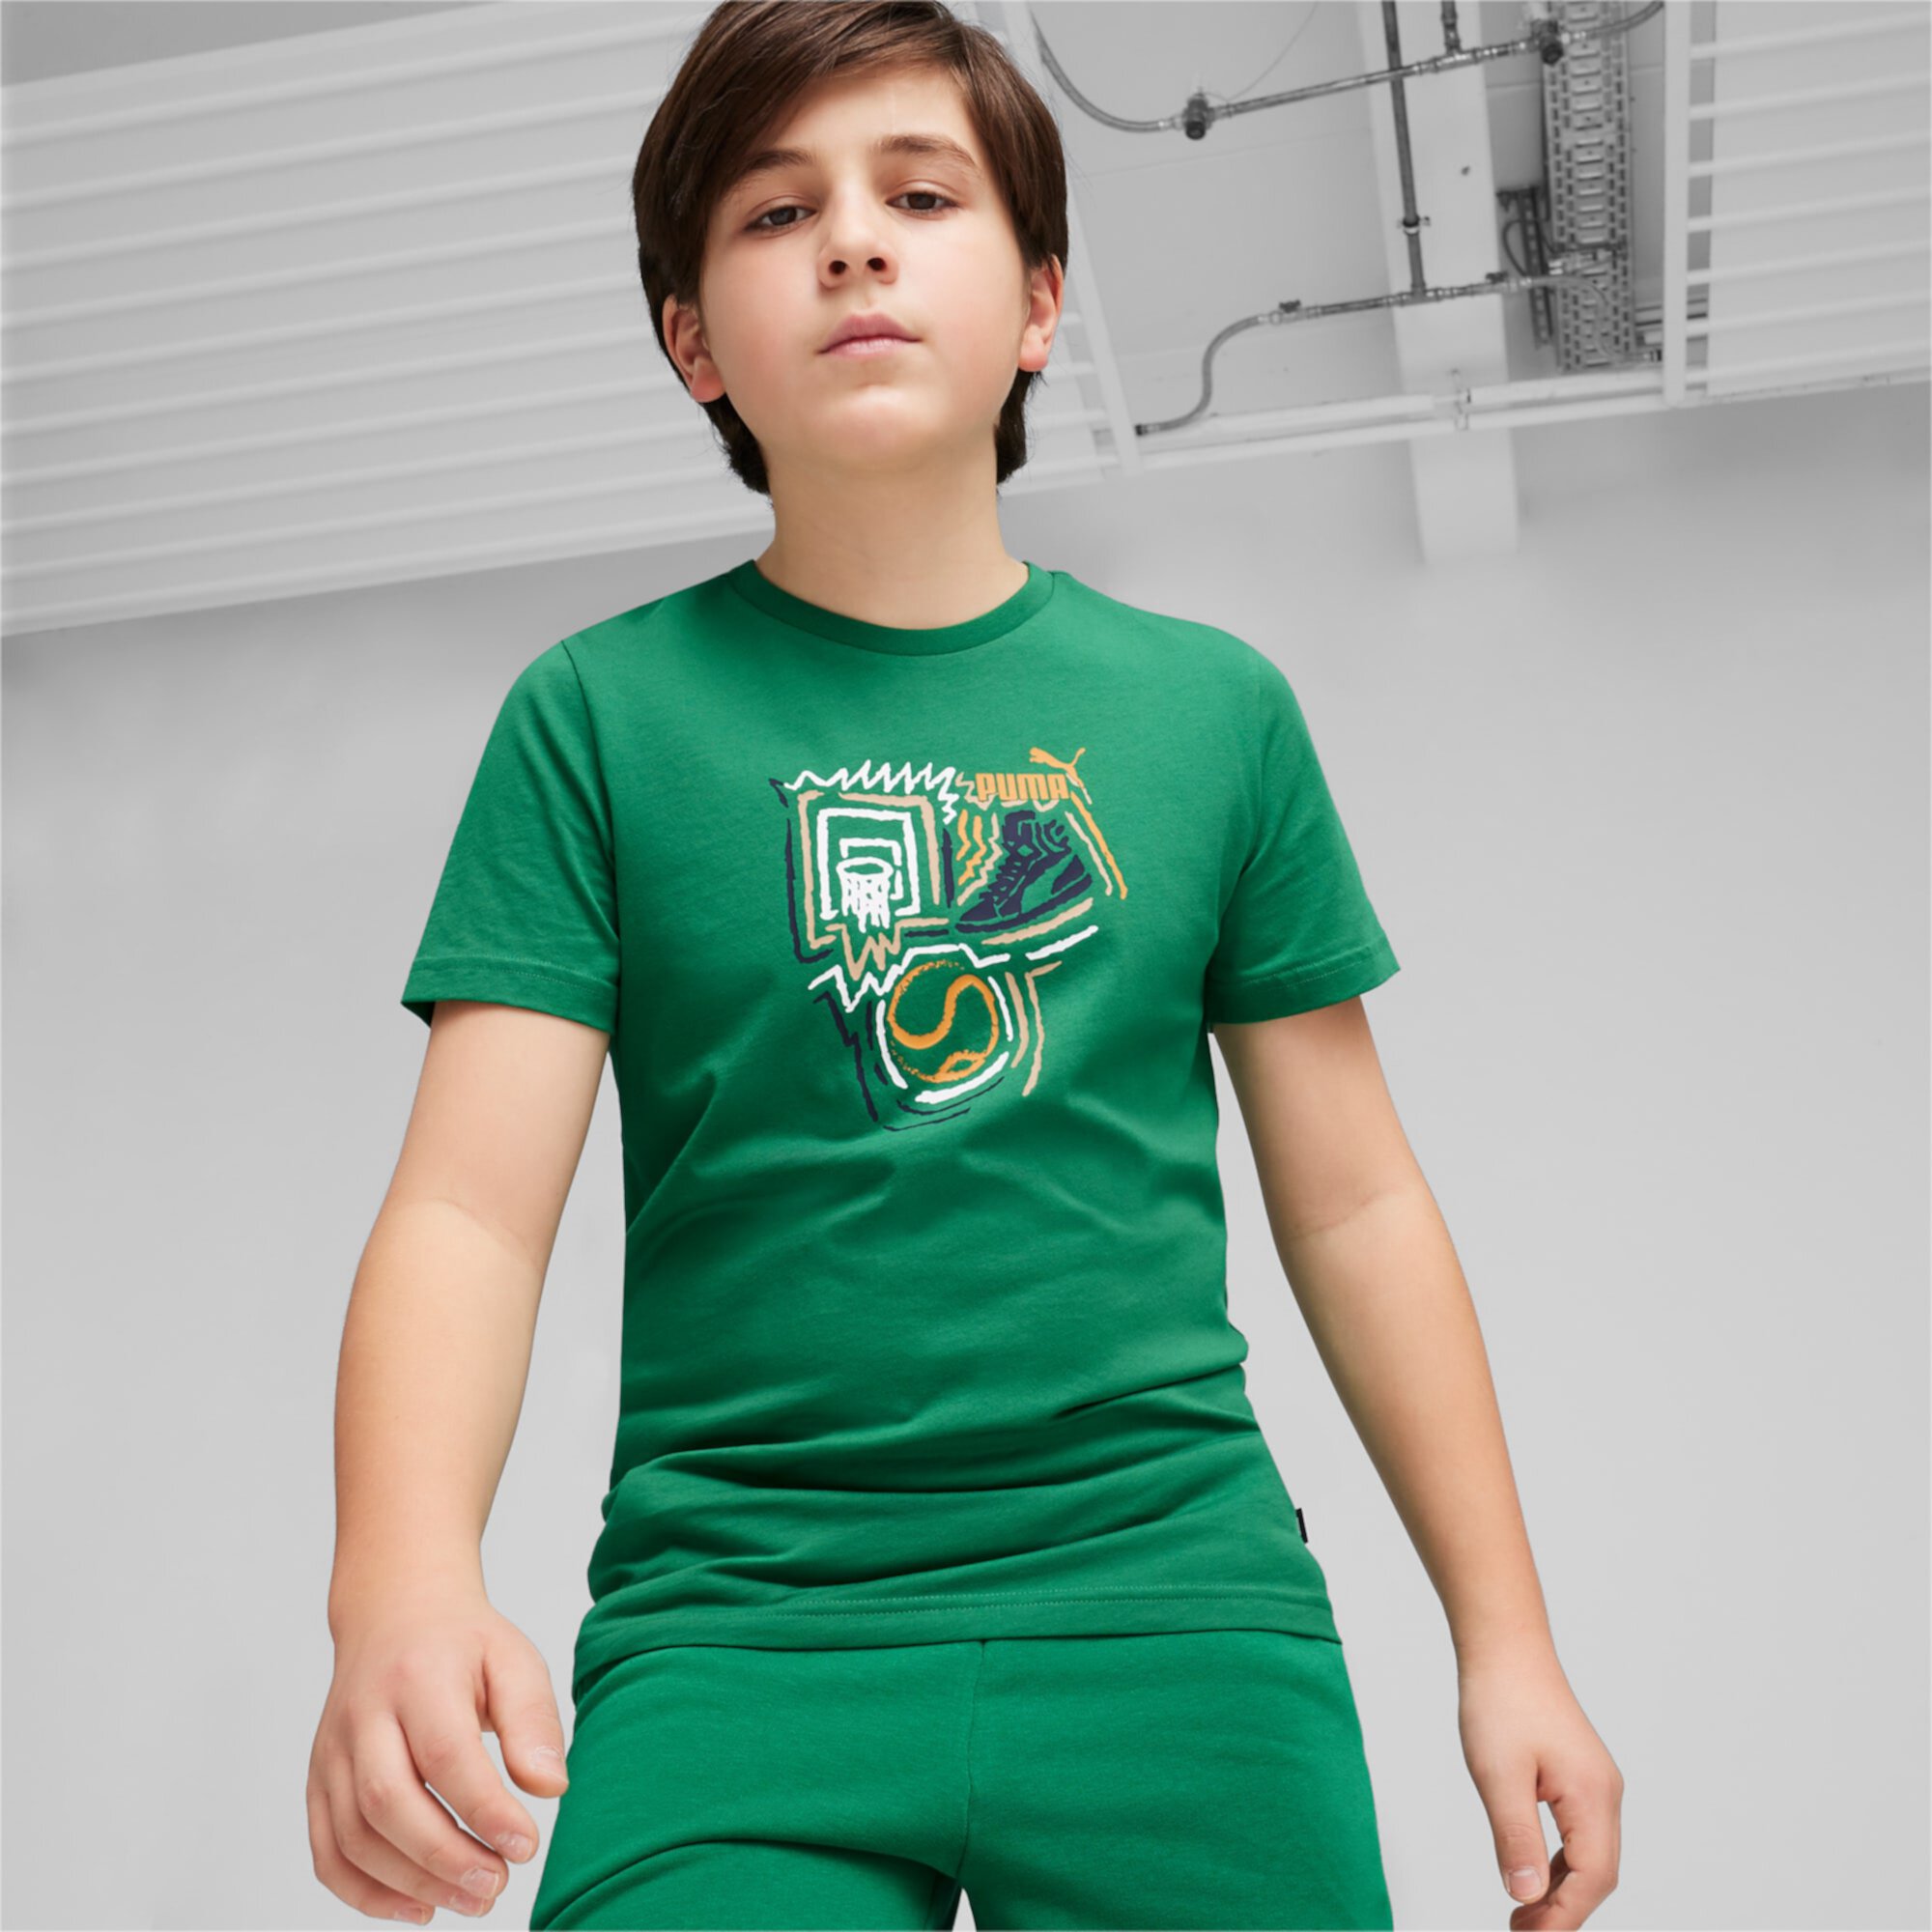 GRAPHICS Year of Sports Youth Tee PUMA